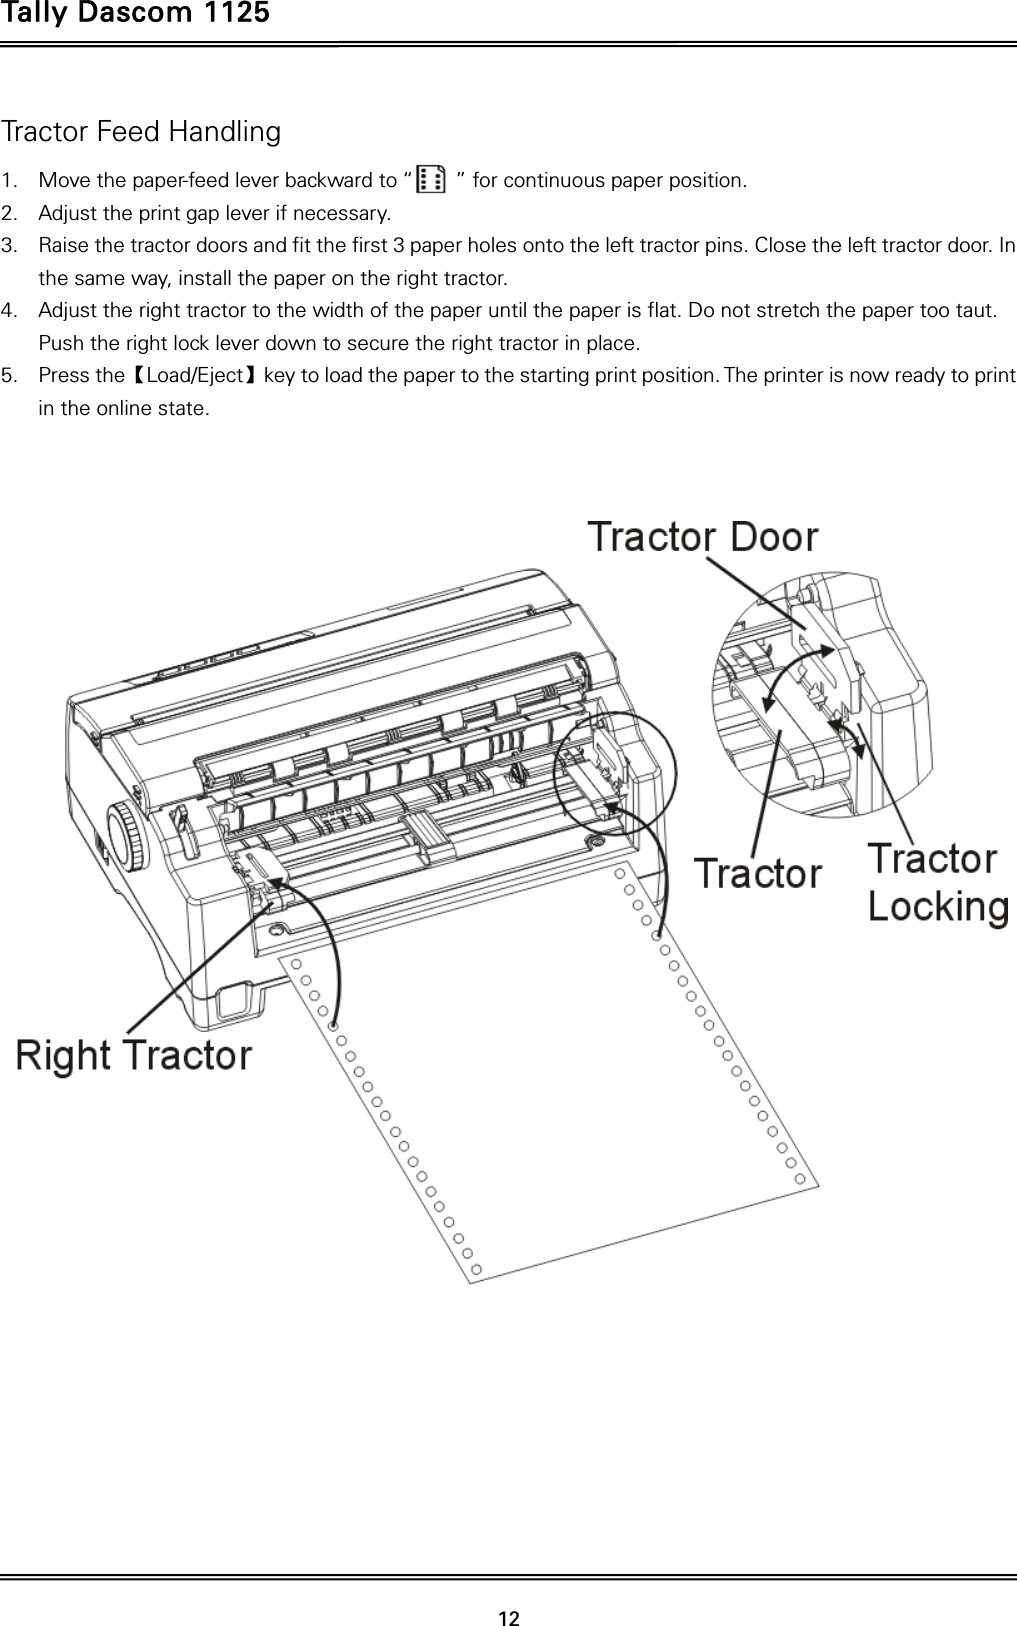 Tally Dascom 1125   12  Tractor Feed Handling 1. Move the paper-feed lever backward to “        ” for continuous paper position. 2. Adjust the print gap lever if necessary.   3. Raise the tractor doors and fit the first 3 paper holes onto the left tractor pins. Close the left tractor door. In the same way, install the paper on the right tractor.   4. Adjust the right tractor to the width of the paper until the paper is flat. Do not stretch the paper too taut. Push the right lock lever down to secure the right tractor in place. 5. Press the【Load/Eject】key to load the paper to the starting print position. The printer is now ready to print in the online state.    